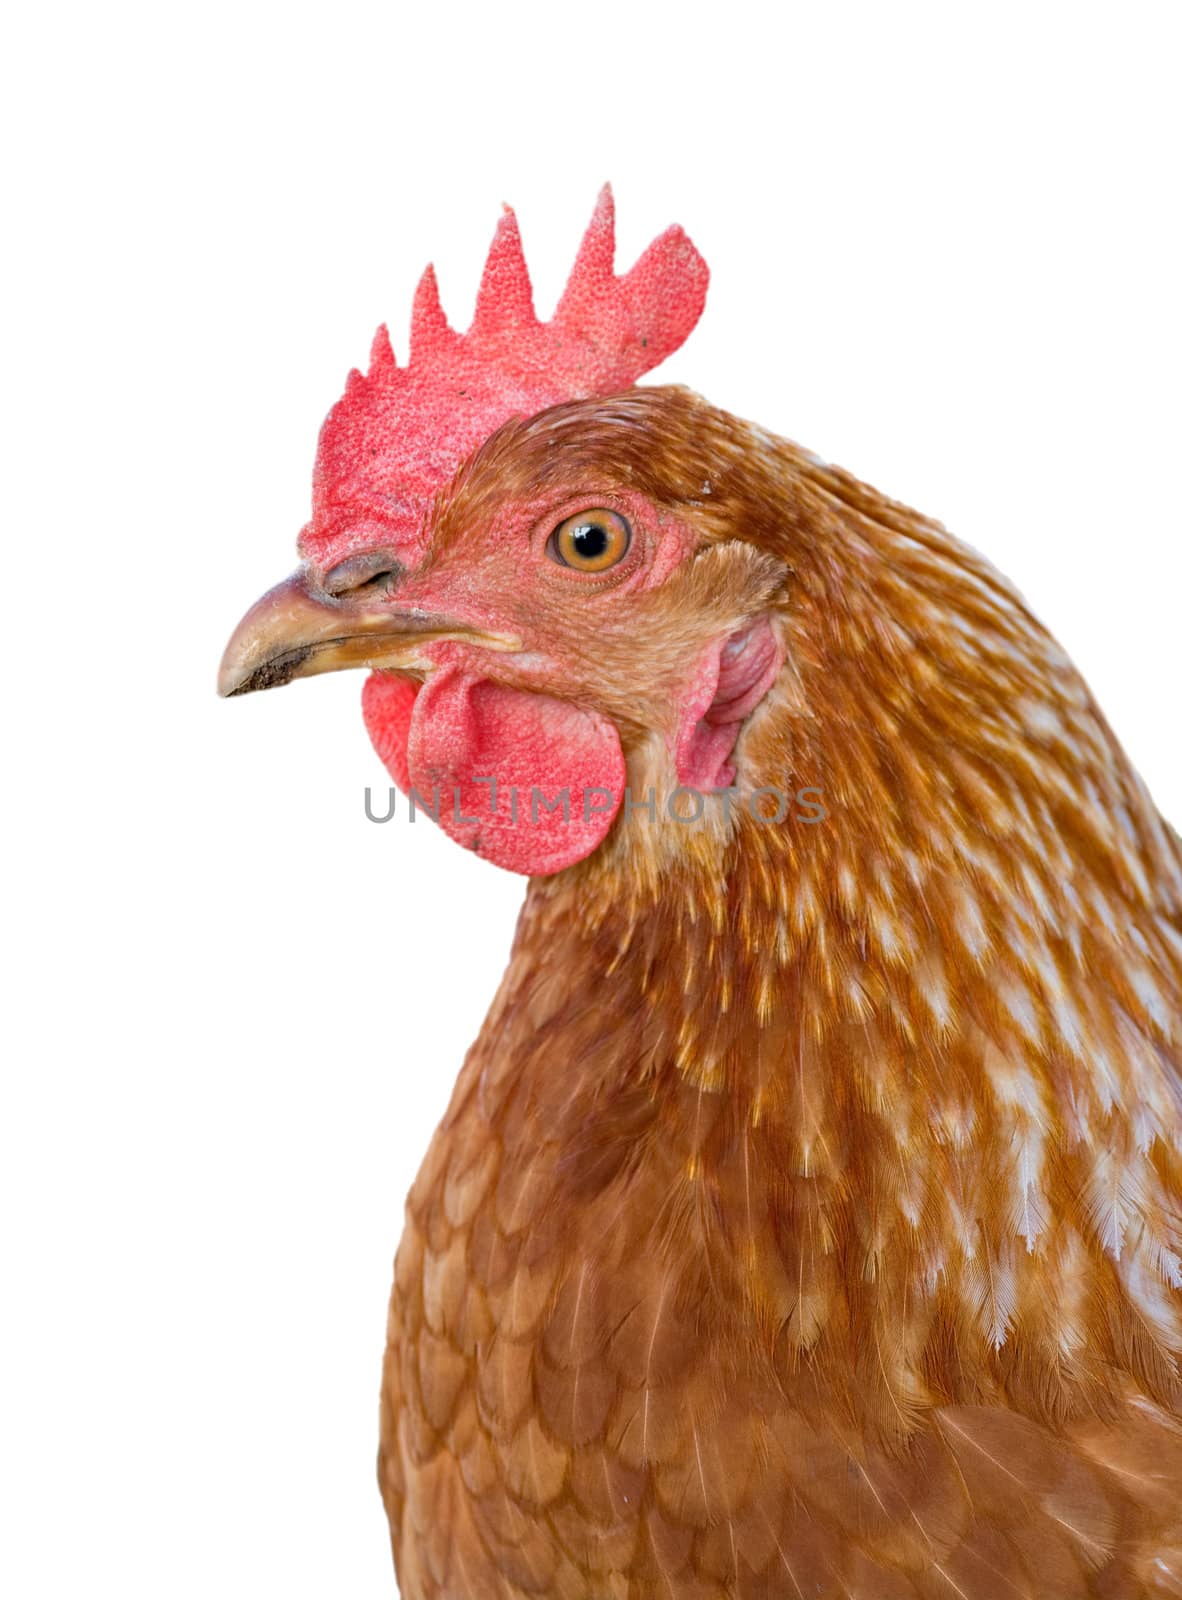 great closeup image of a hen on white background